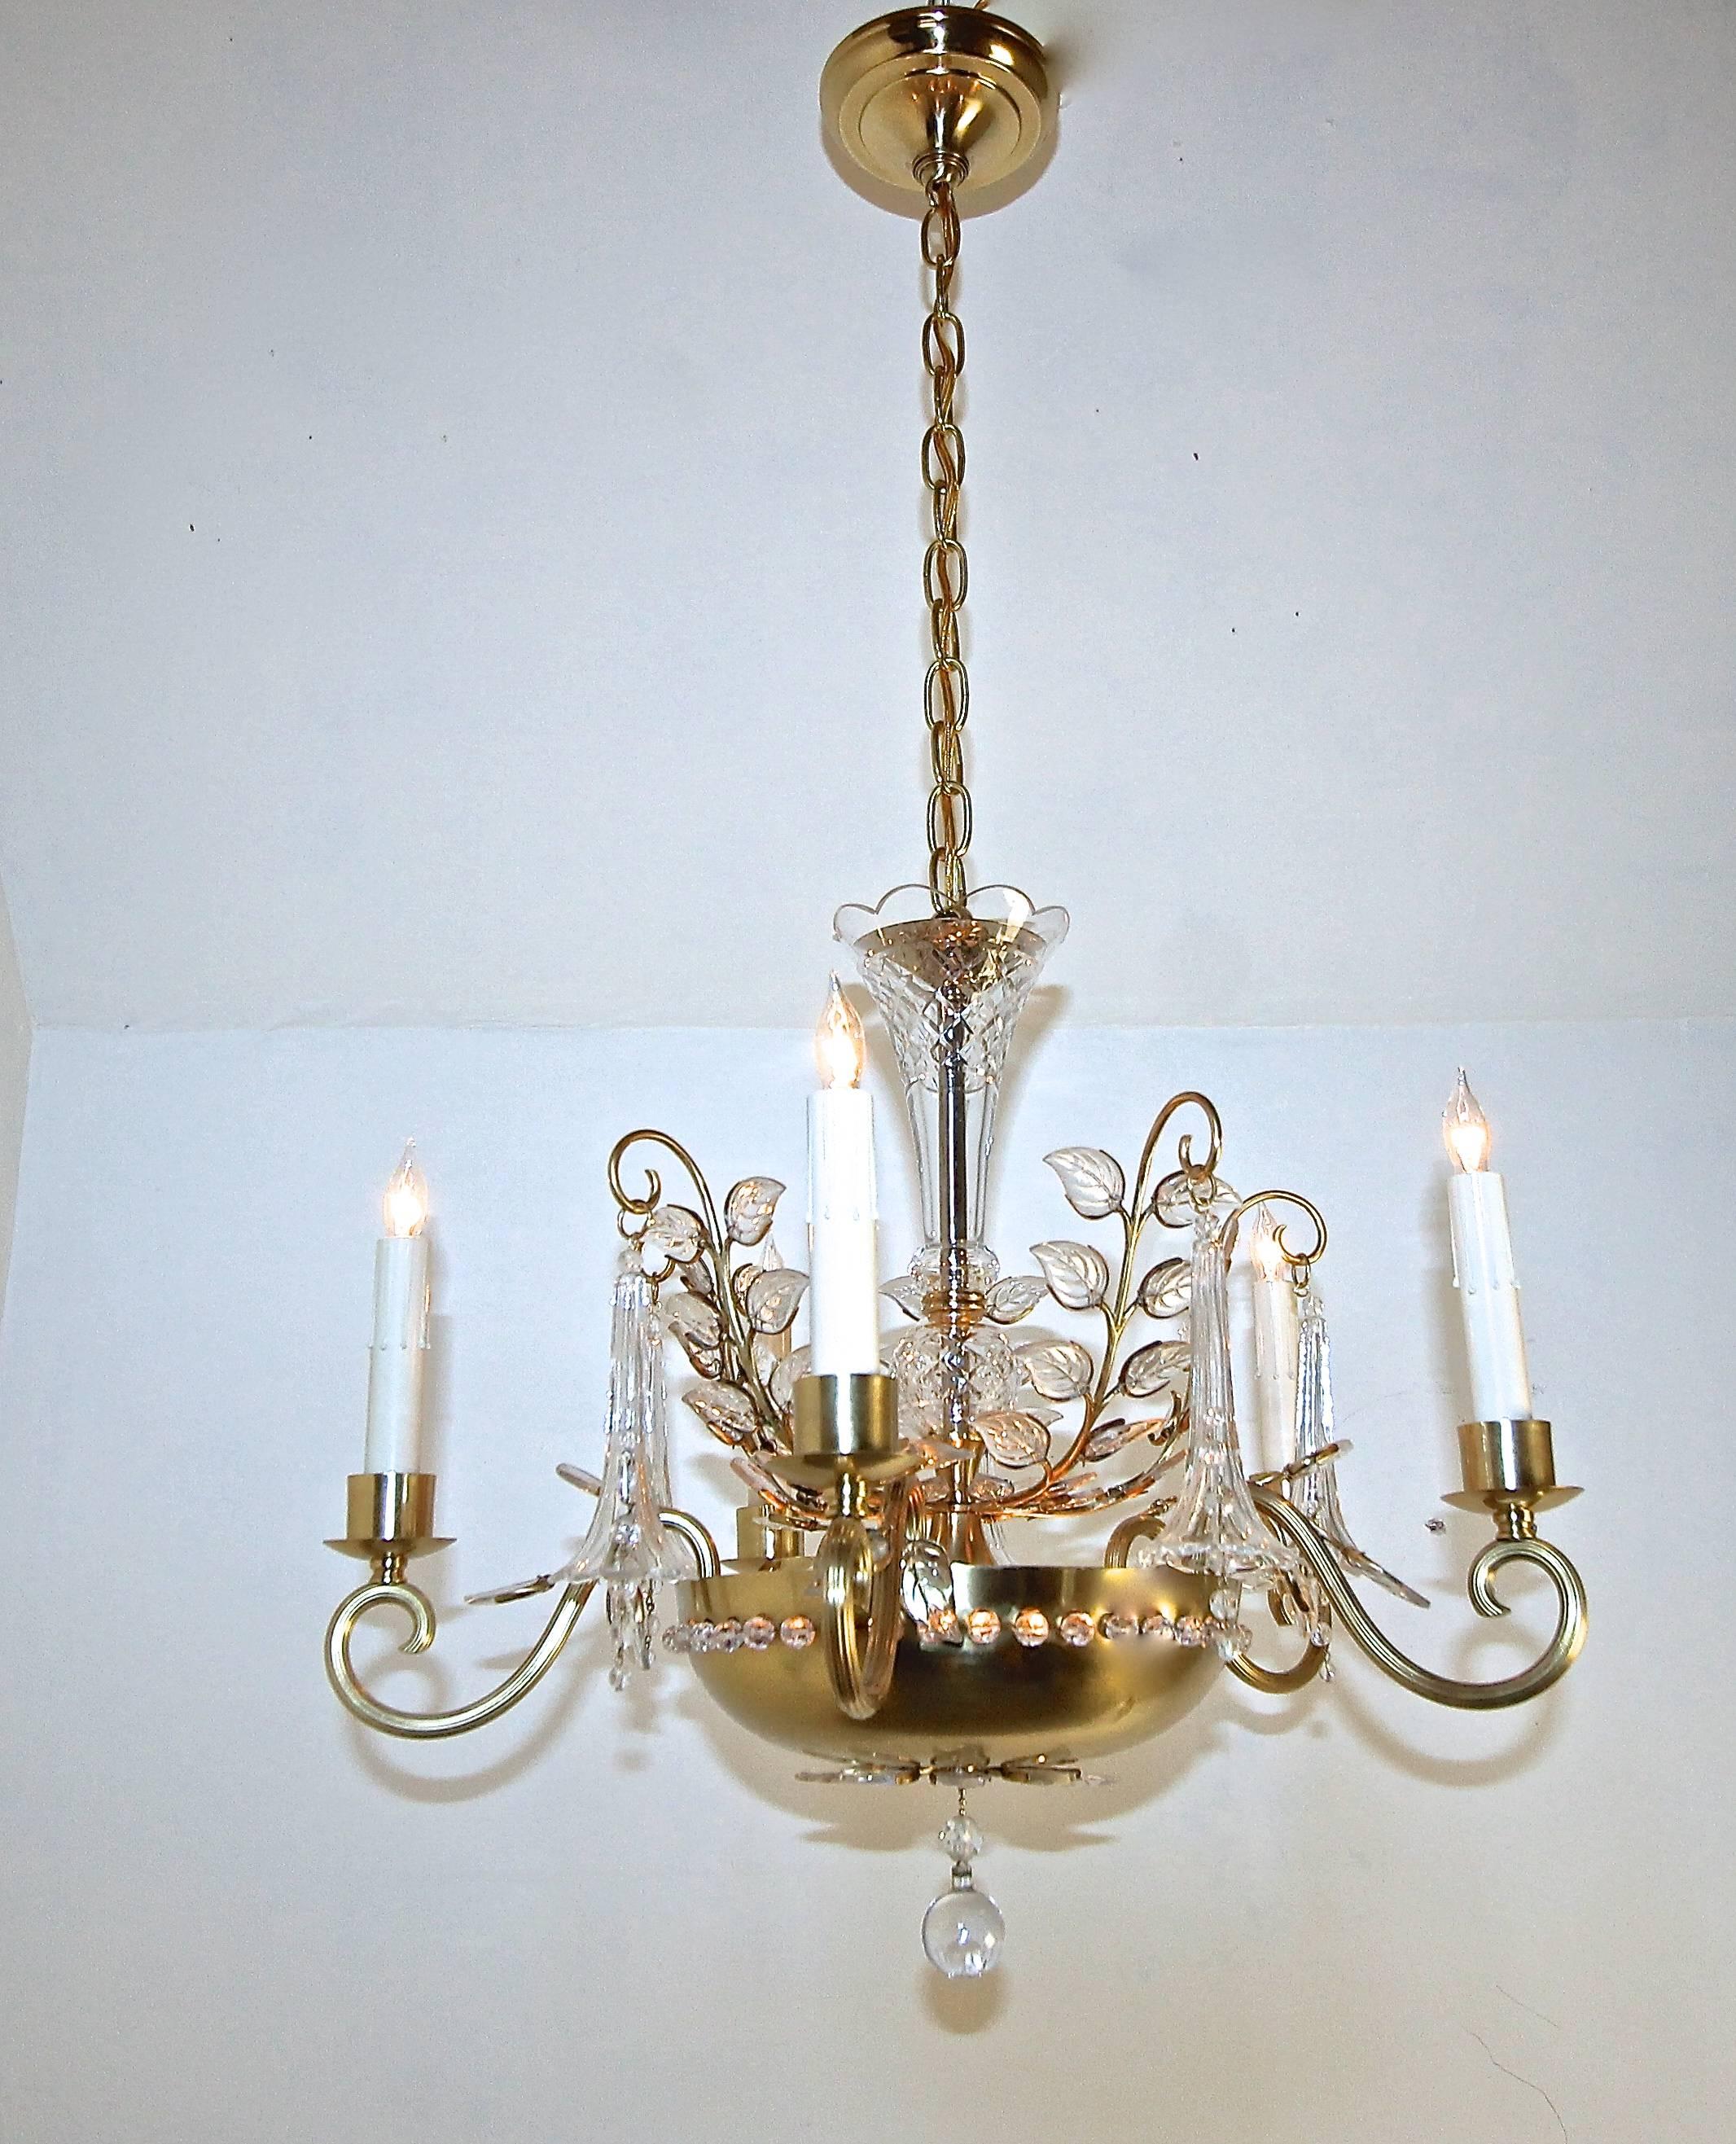 Dish form chandelier in the style of Maison Baguès. Chandelier is illuminated by five candle arms as well as three interior lights that illuminate the pierced brass dish and crystal elements. Center column is surrounded by crystal leaves with